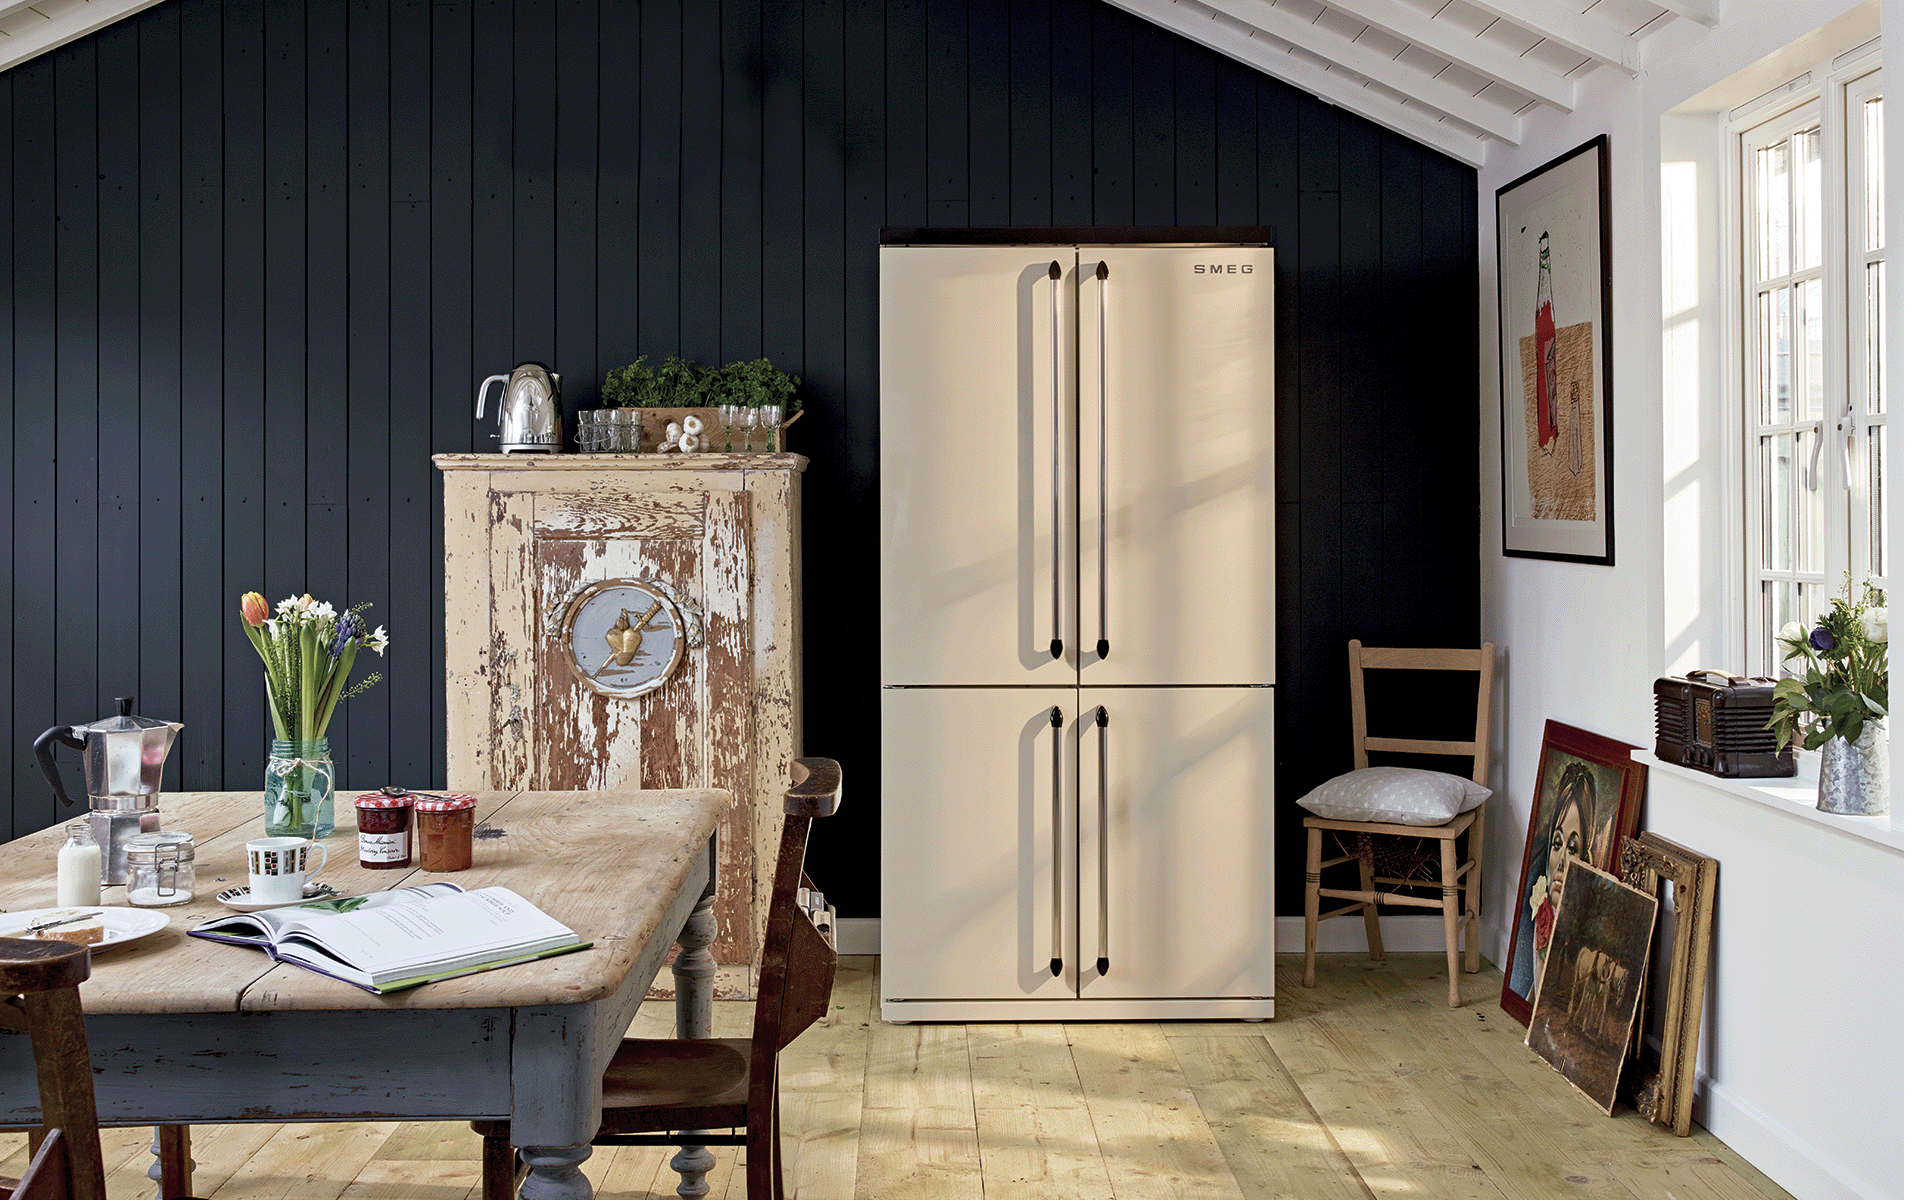 Cream Smeg American Fridge Freezer in a room with a blue distressed dining table and paintings on the floor.